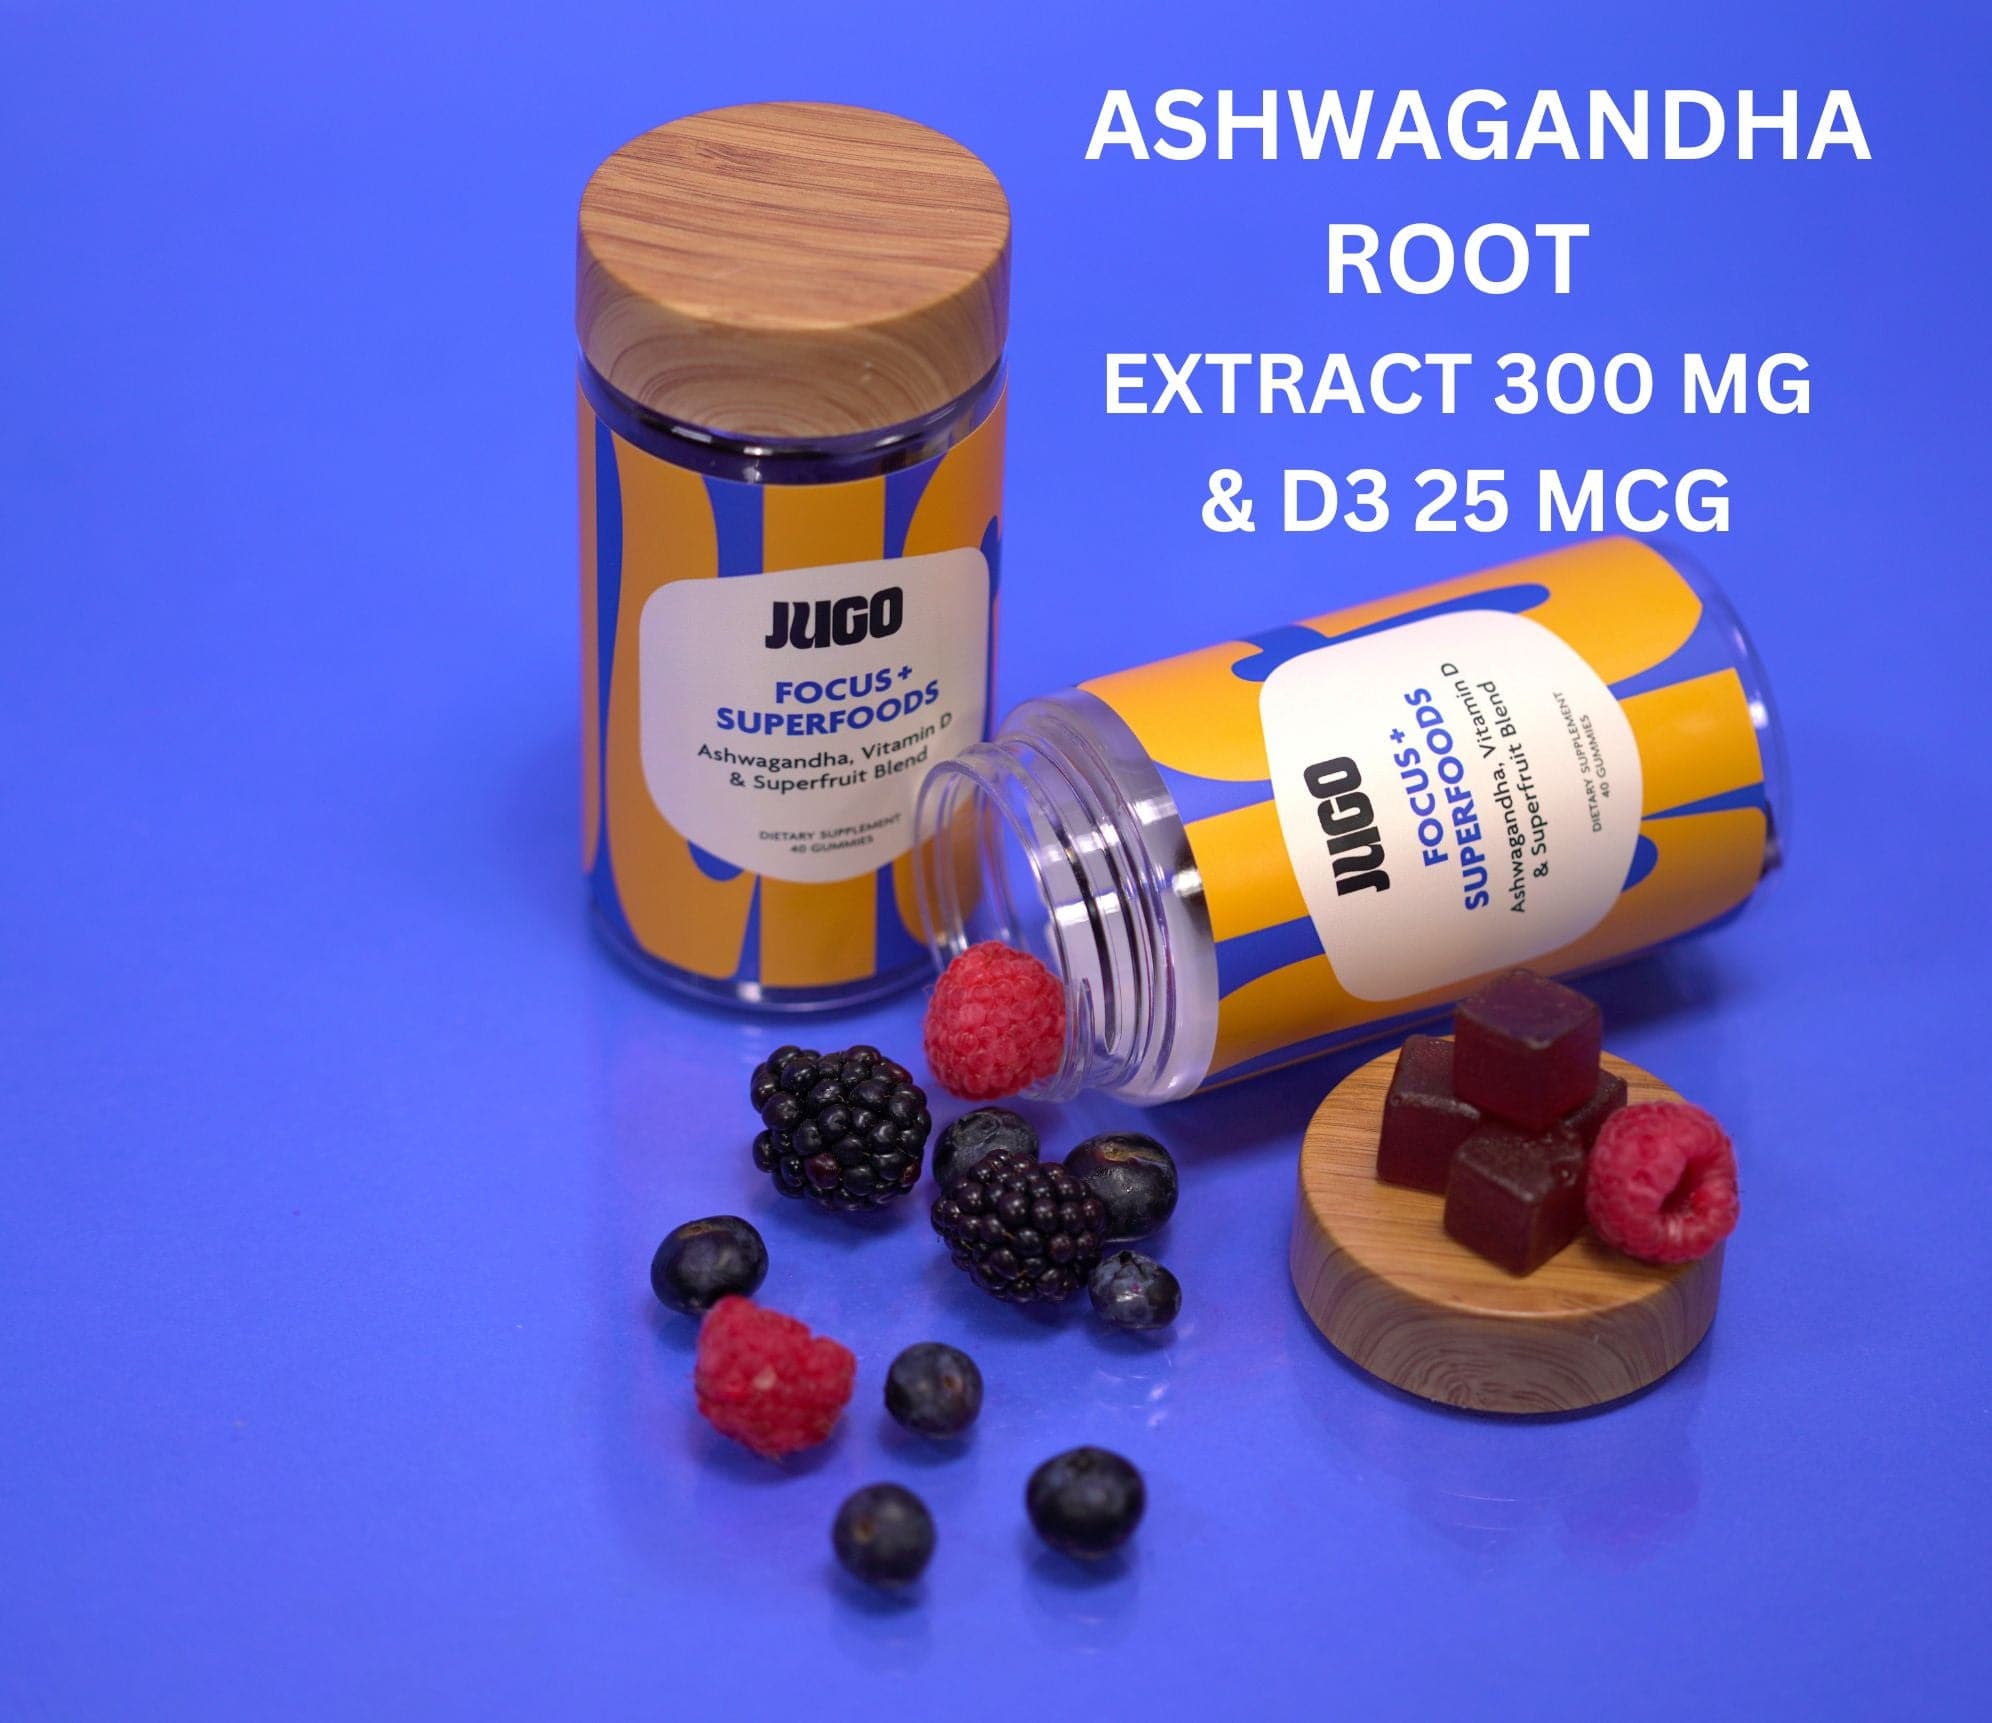 Focus gummies made with ashwagandha root extract